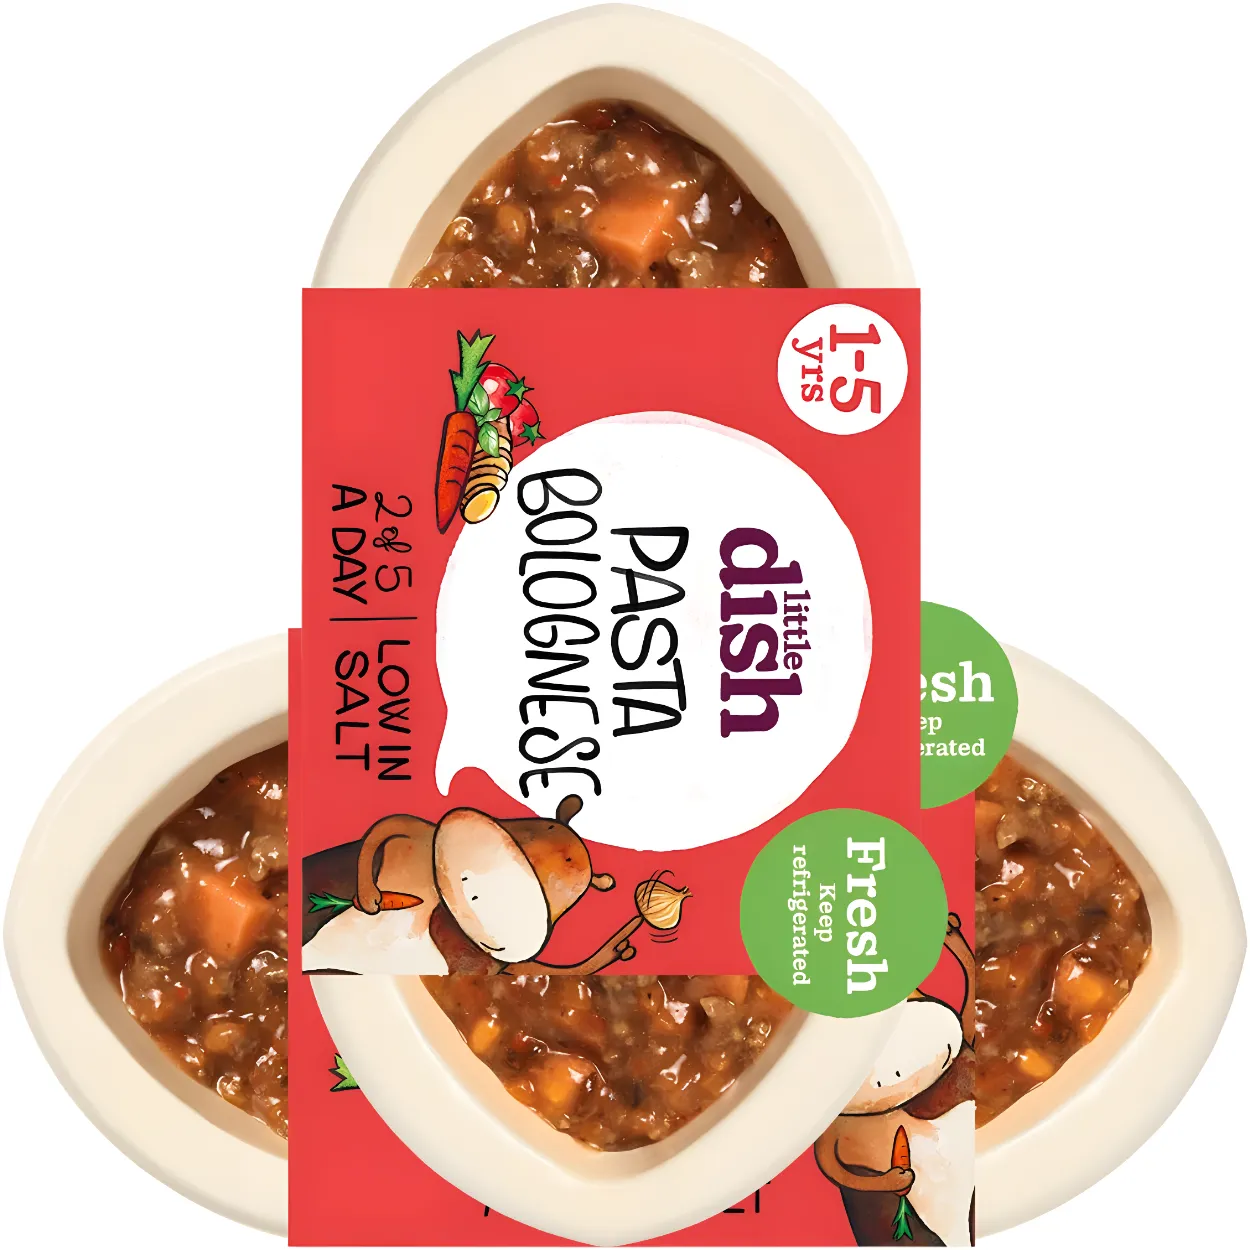 Free Little Dish Meals